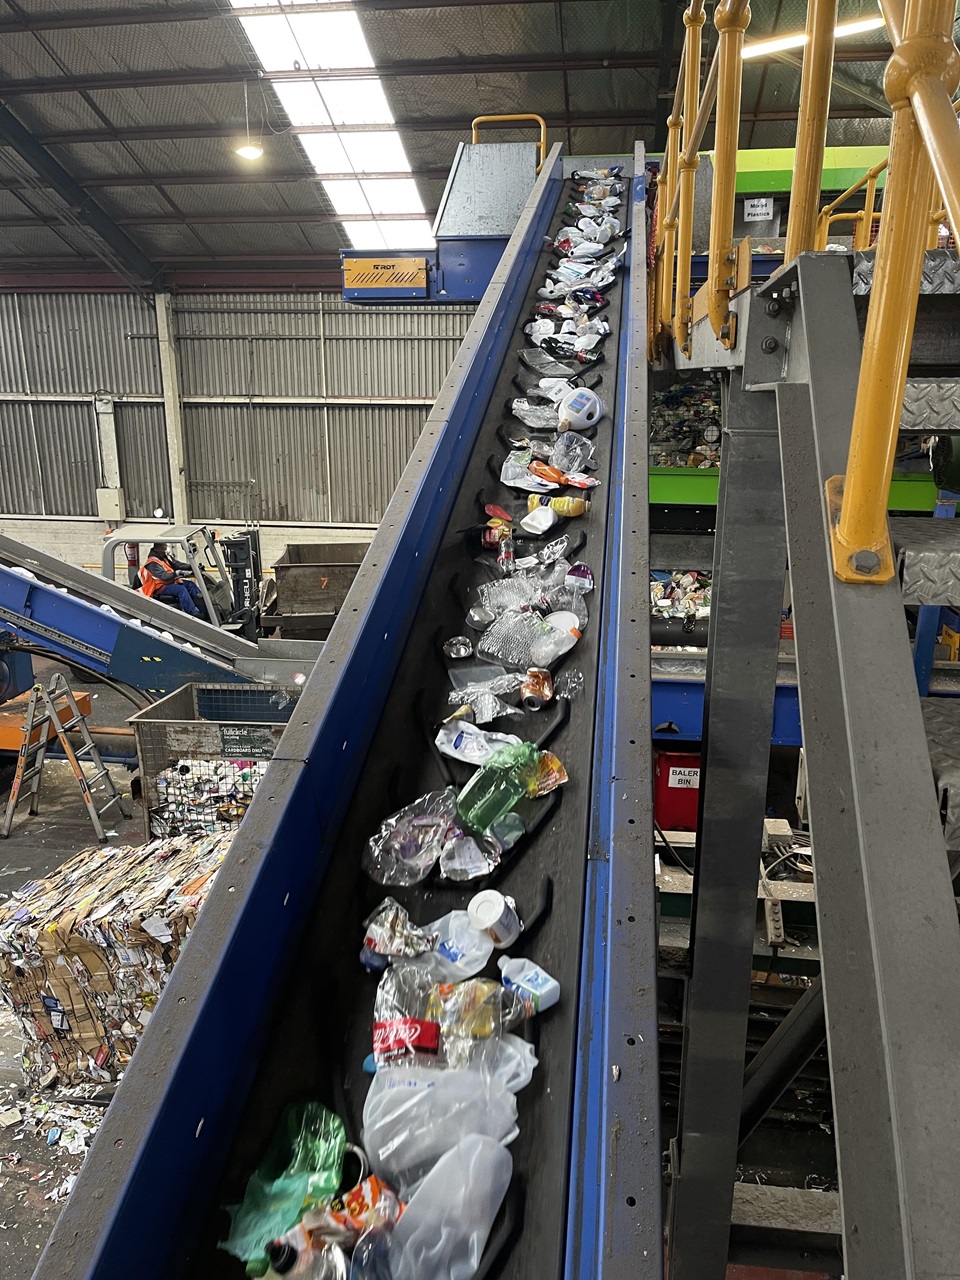 A blue conveyor belt belting plastic bottles and containers upwards, with a yellow and grey metal staircase to the right, and bales of recyclable materials being prepared below.